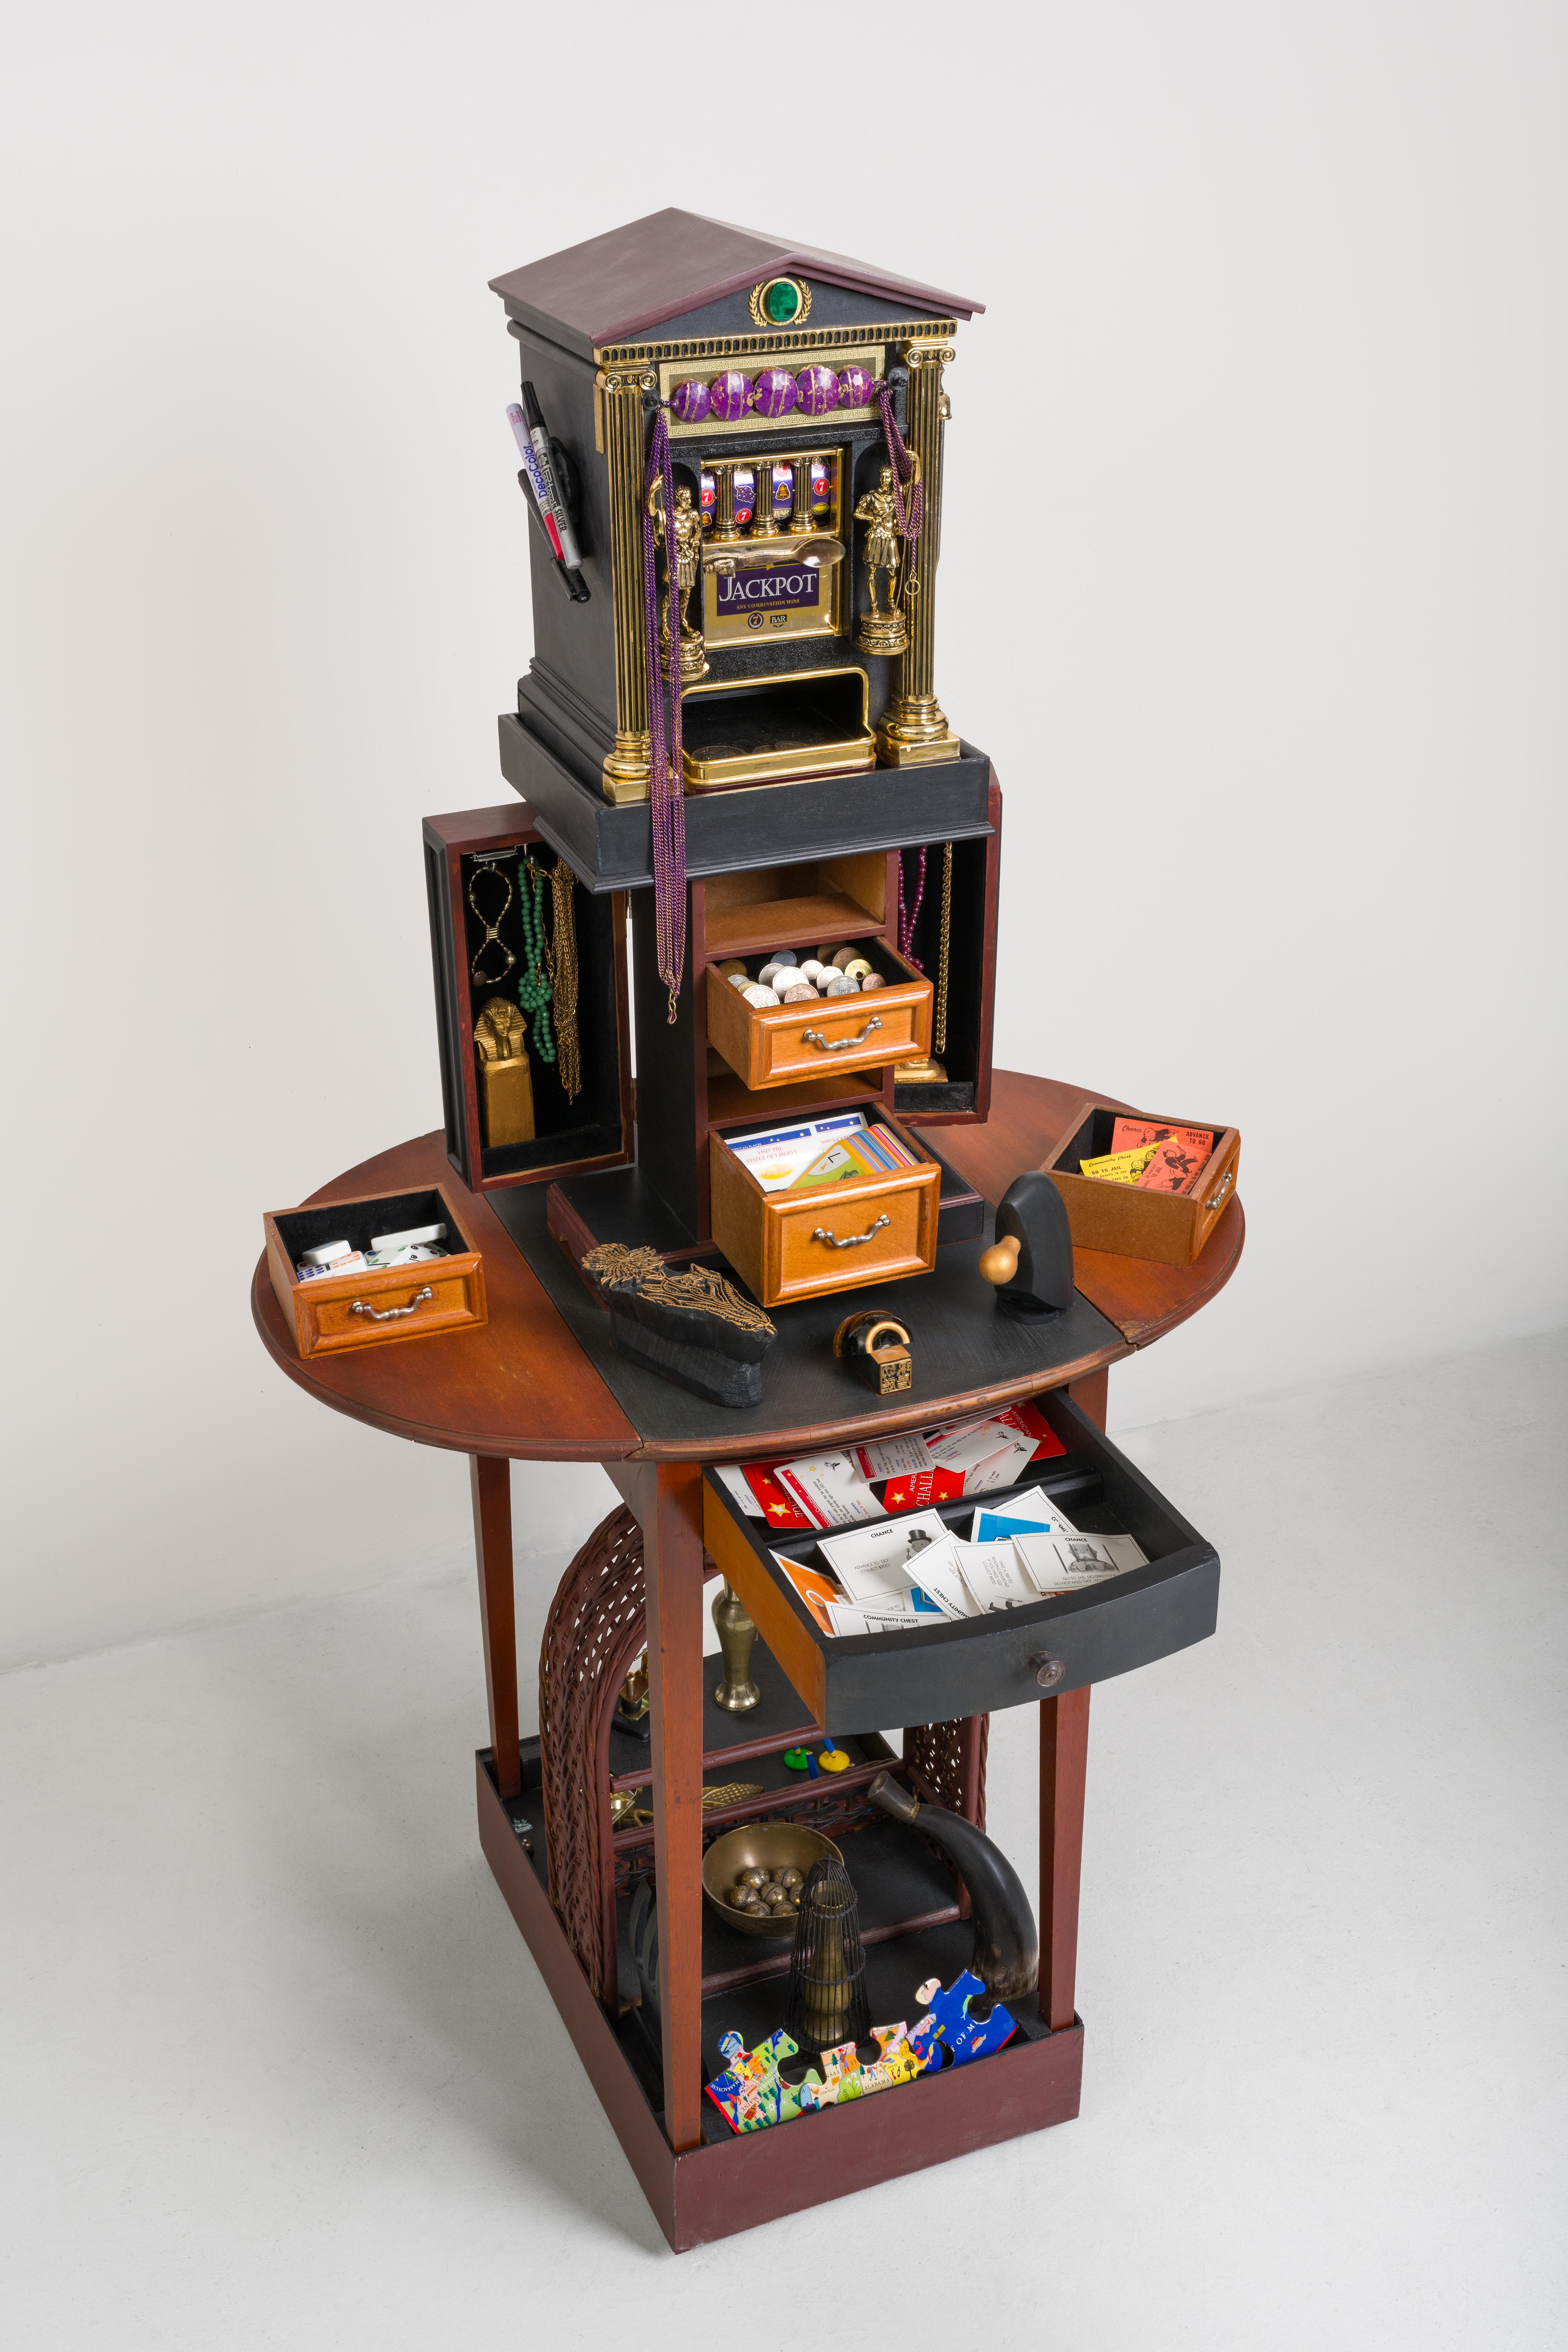 Linda Stein Abstract Sculpture - Gaming Journey 1060 - Cabinet of Curiosities Wunderkammer Contemporary Sculpture